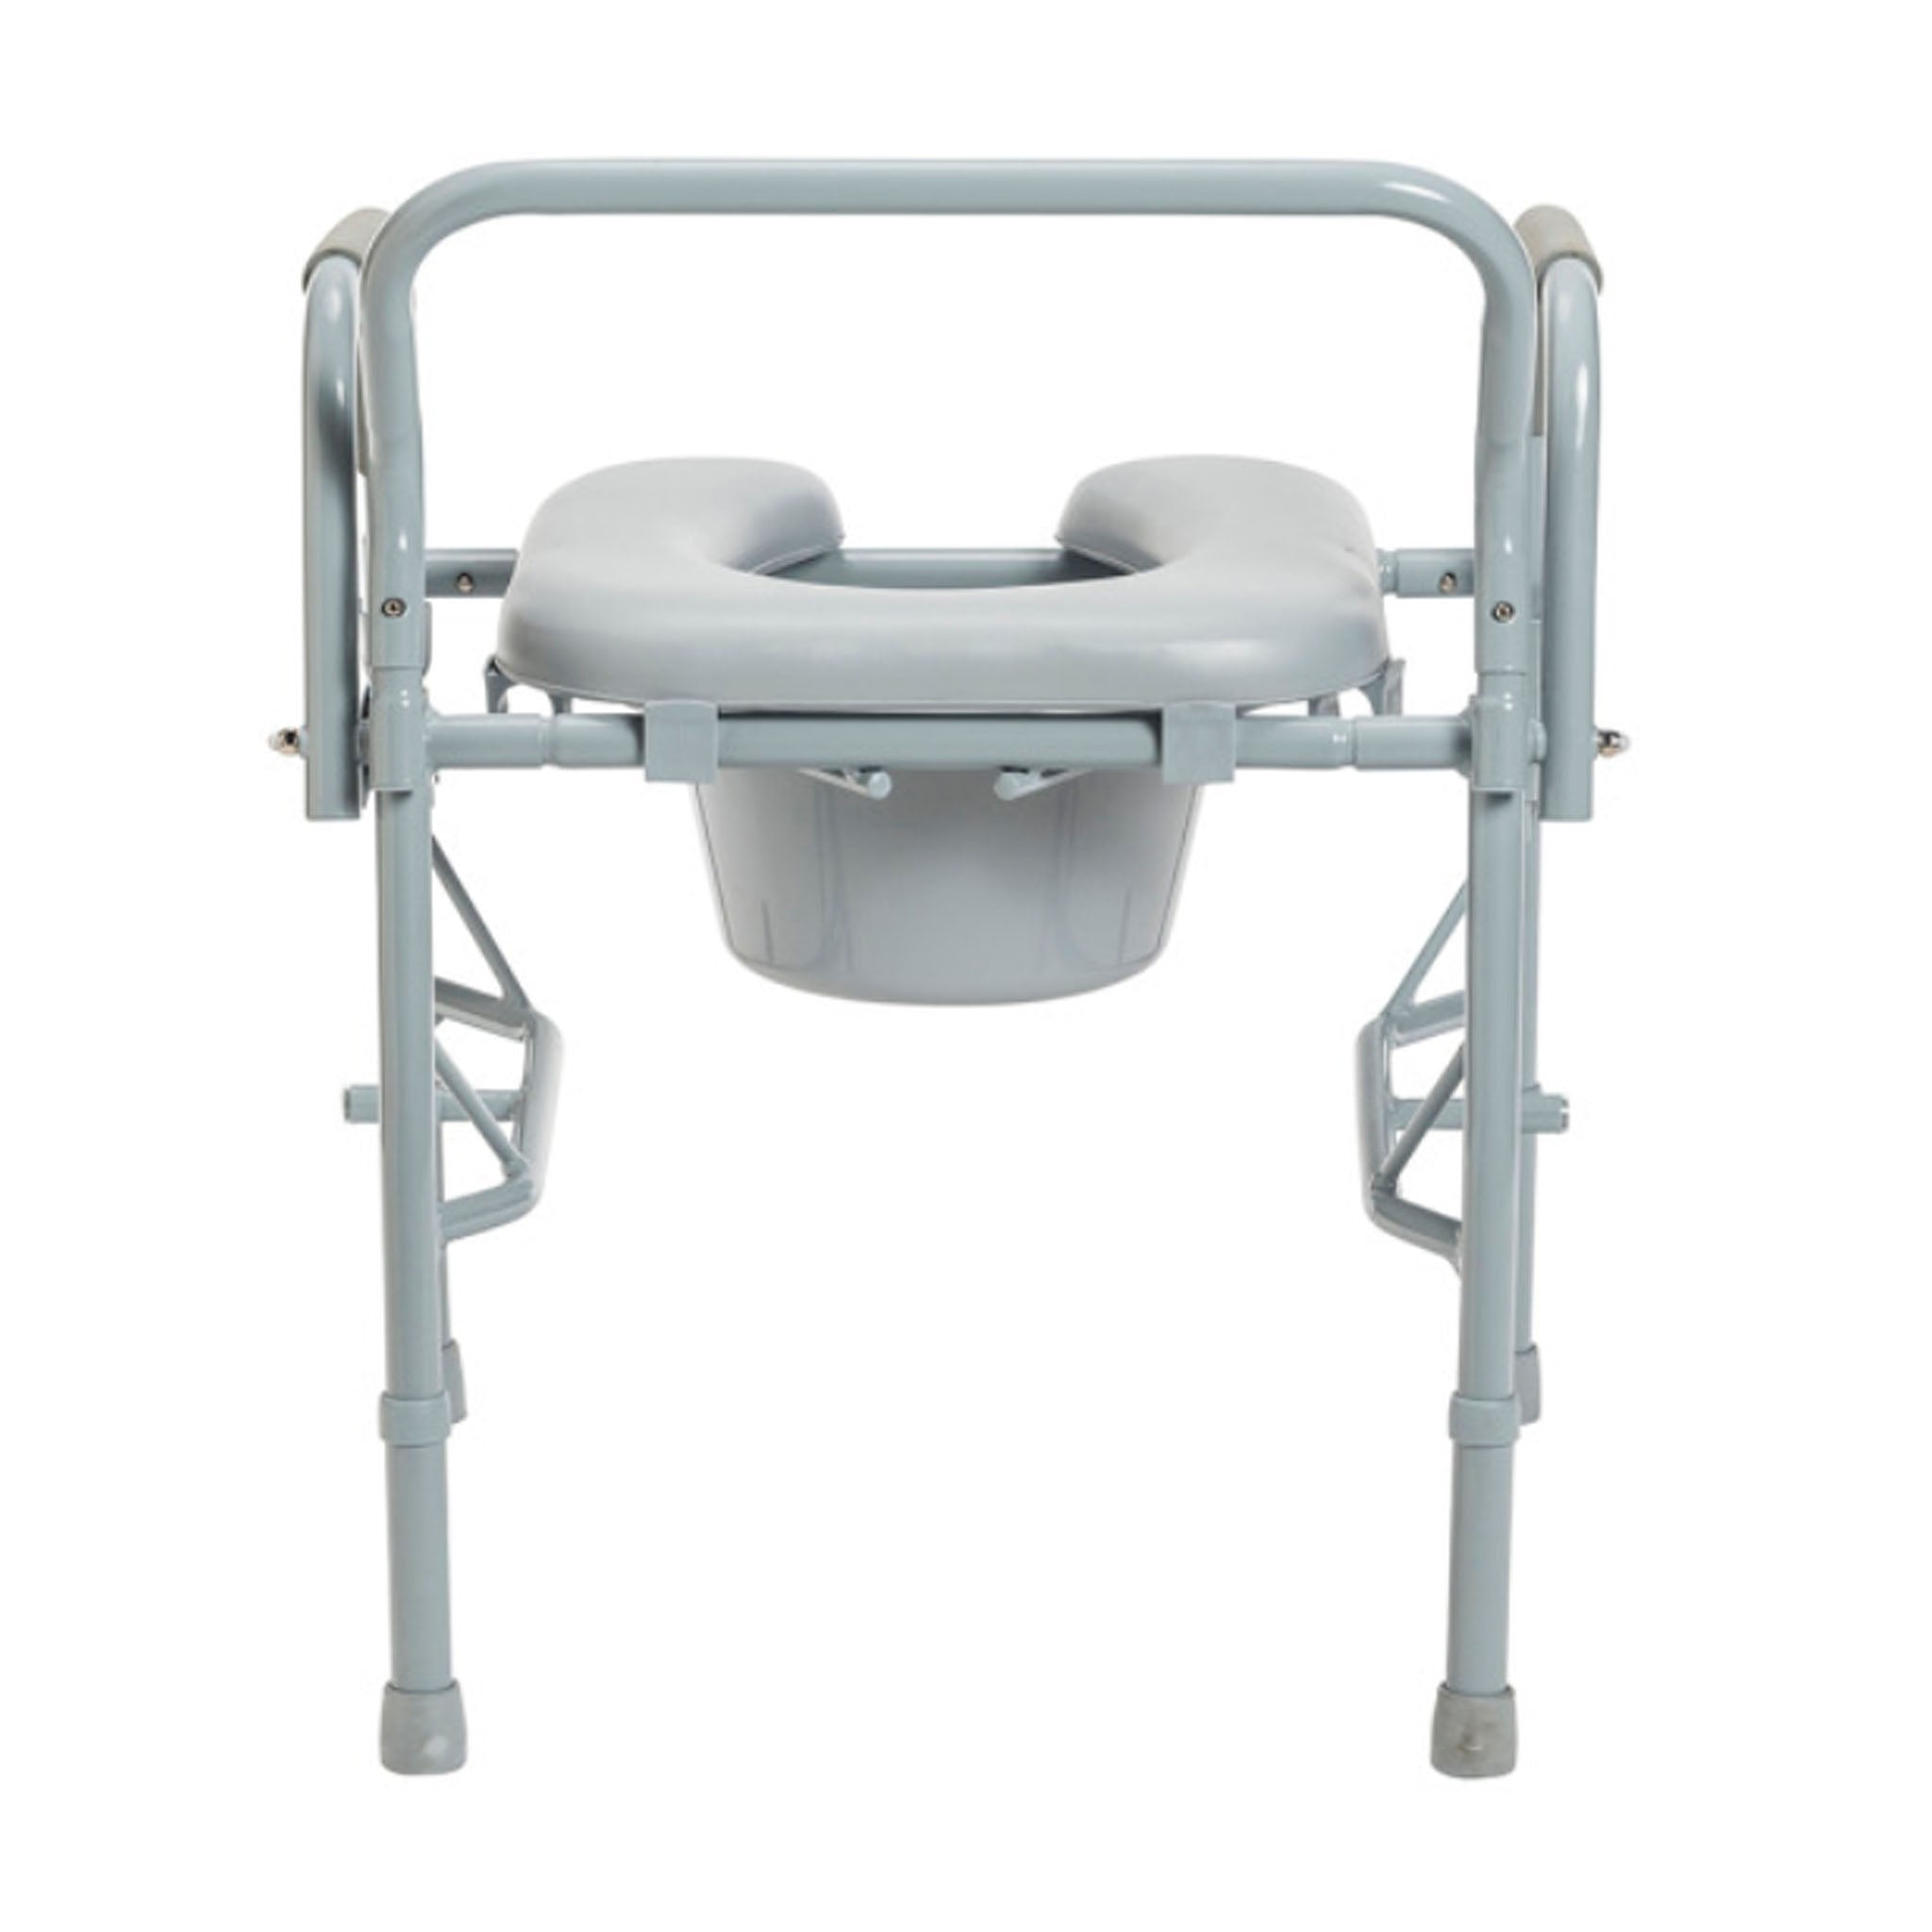 3-in-1 Steel Drop Arm Bedside Commode with Padded Seat by Drive Medical